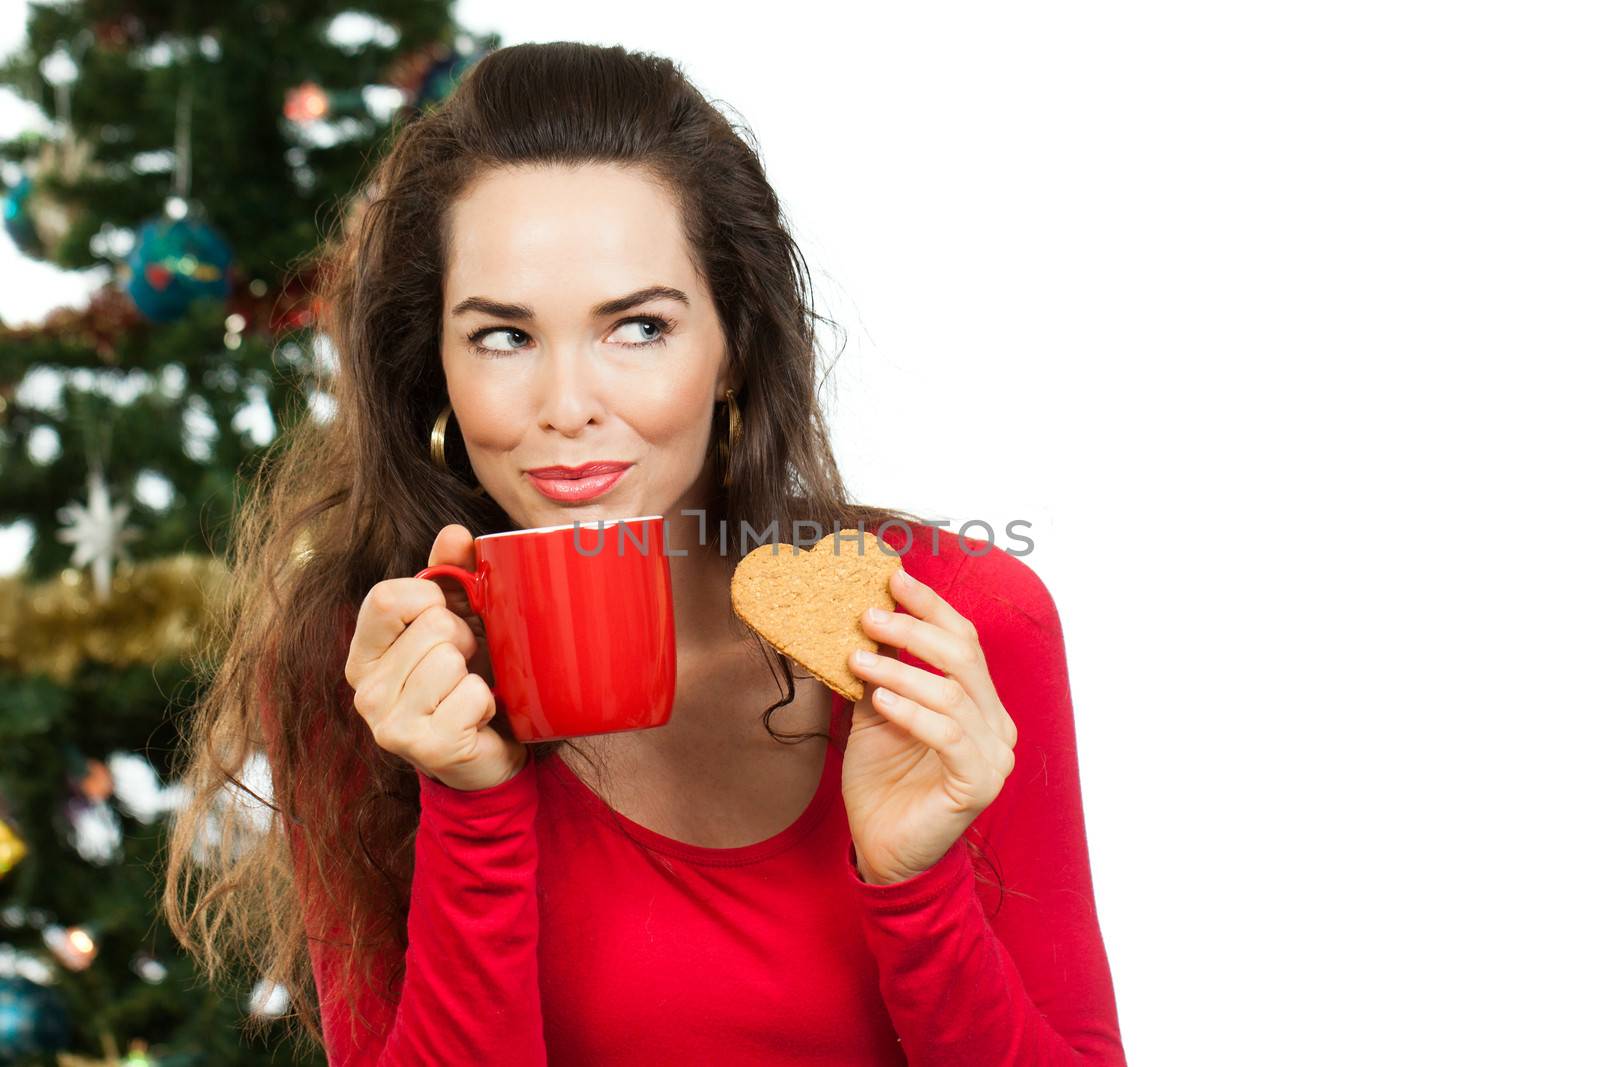 Beautiful woman enjoying a hot drink and gingerbread cookie in front of a Christmas tree. Isolated on white.